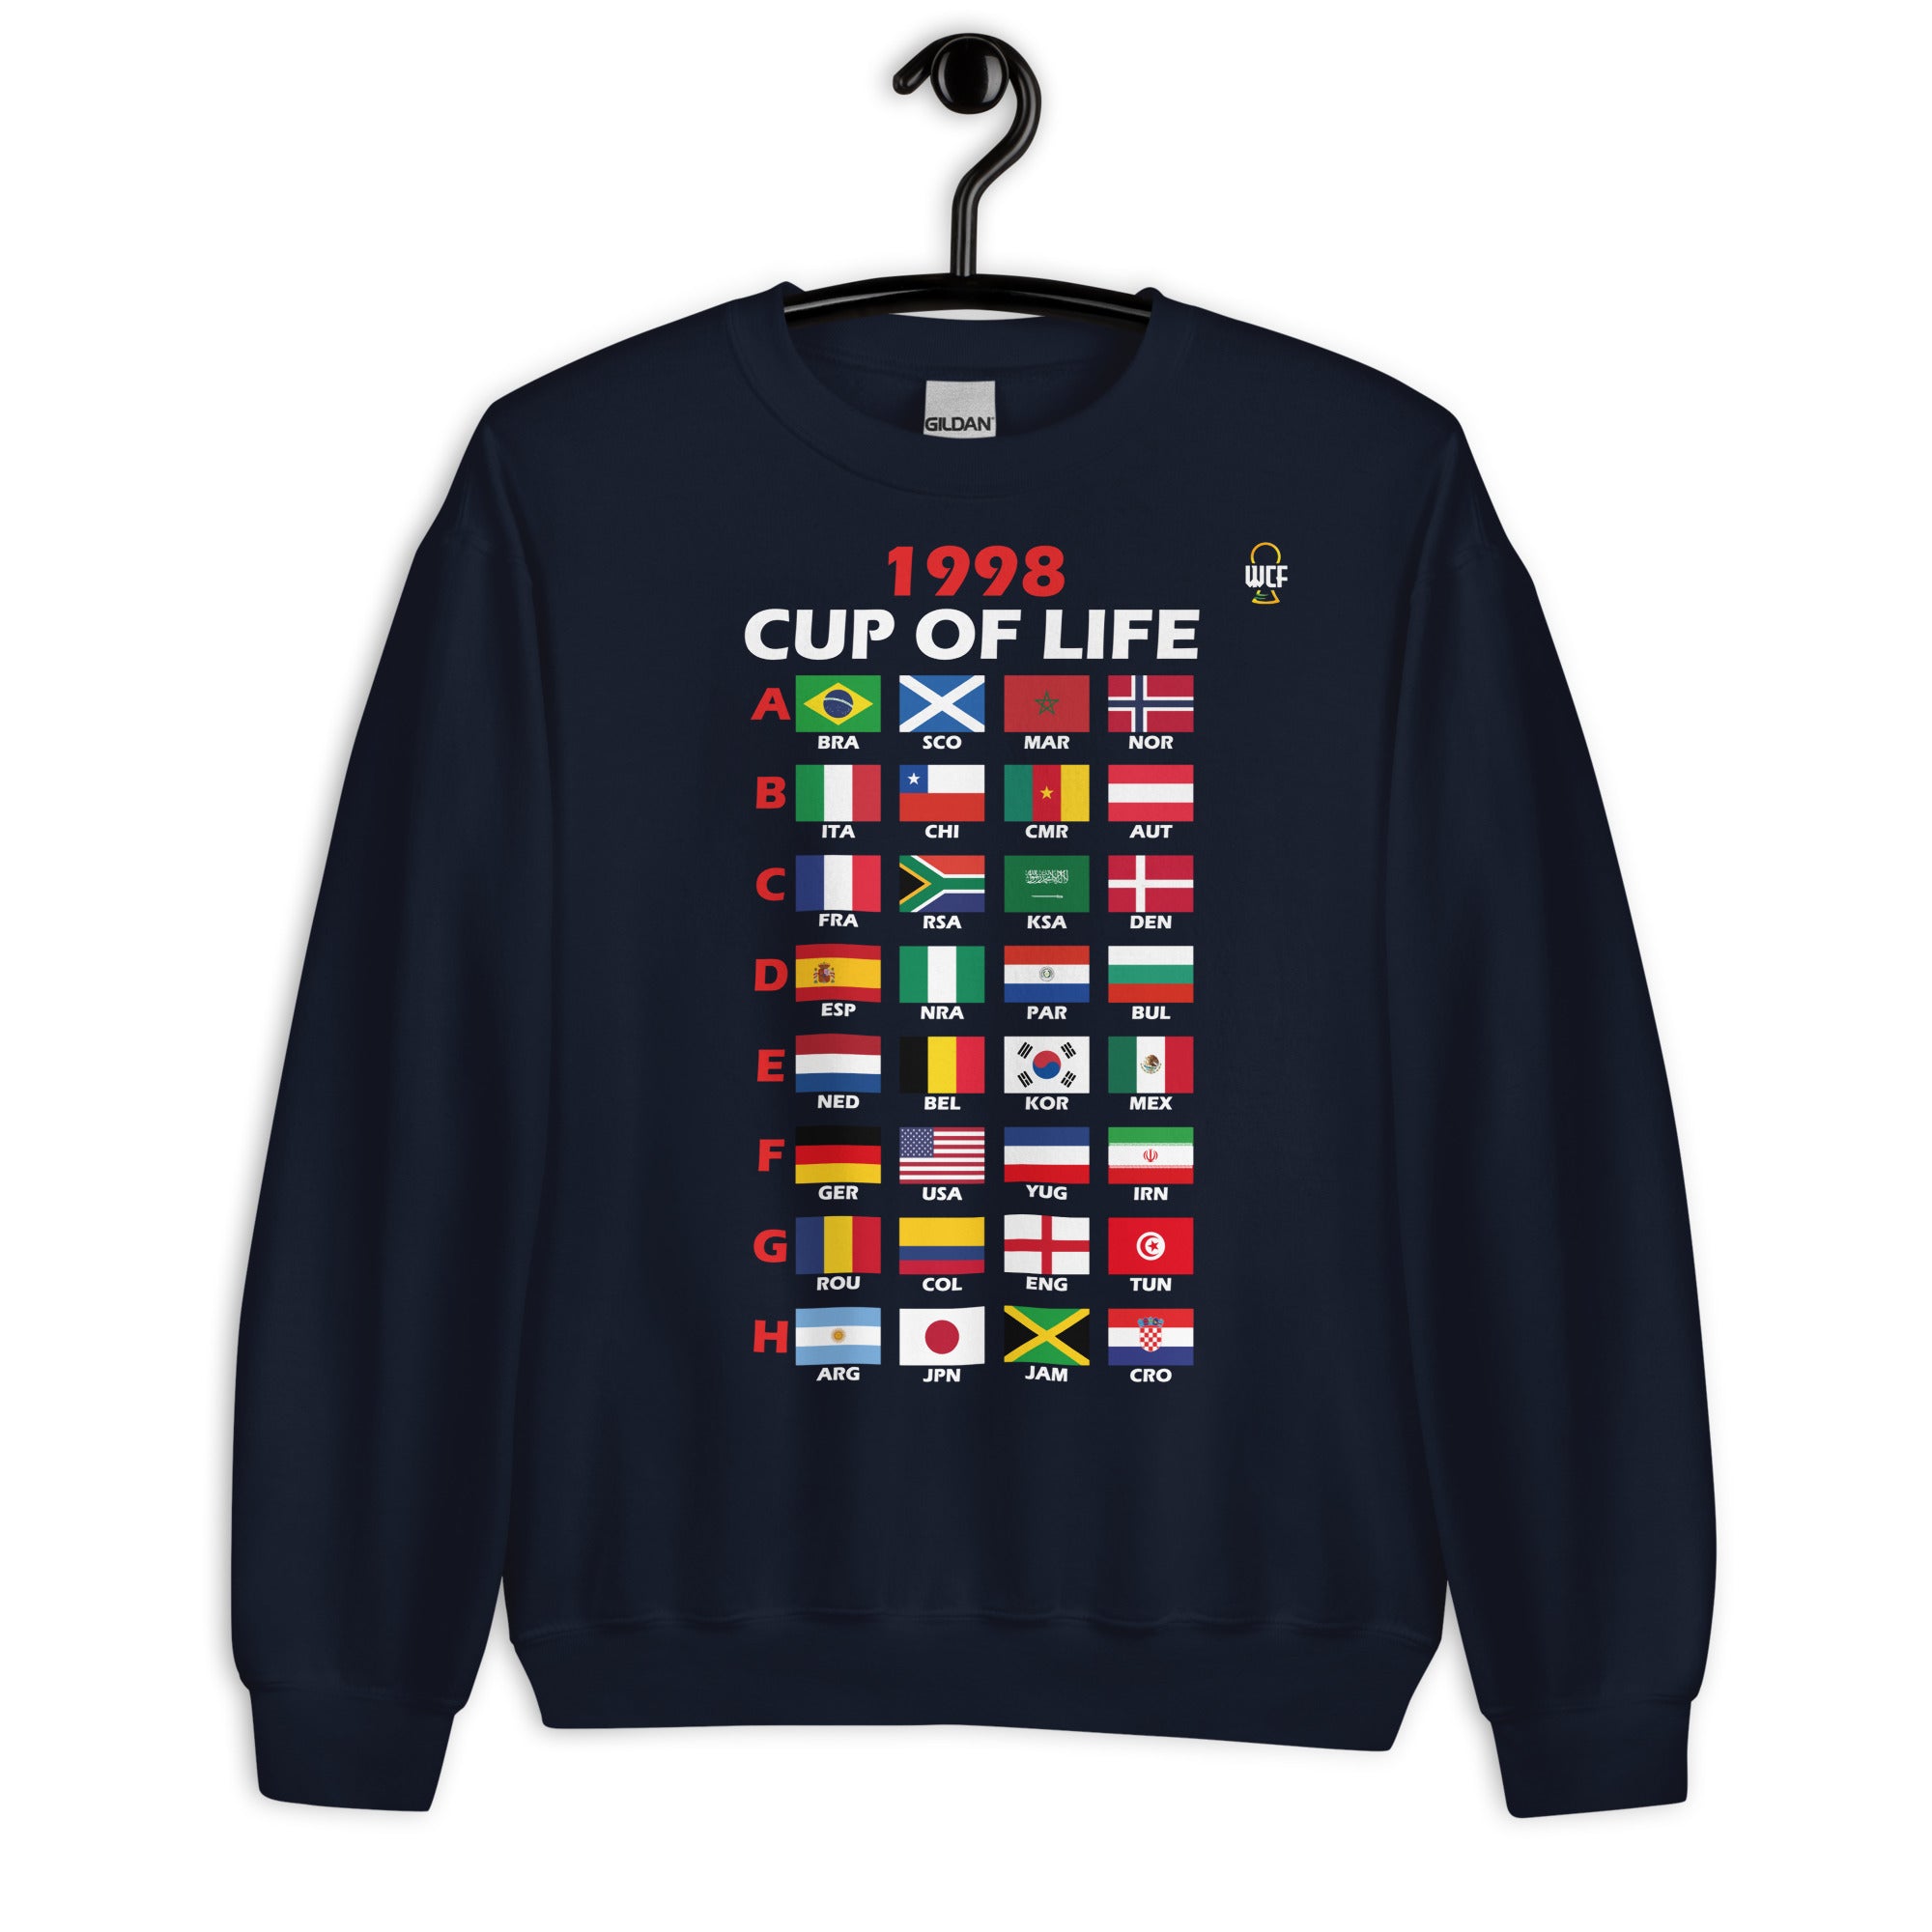 FIFA World Cup France 1998 Sweatshirt - Cup of Live